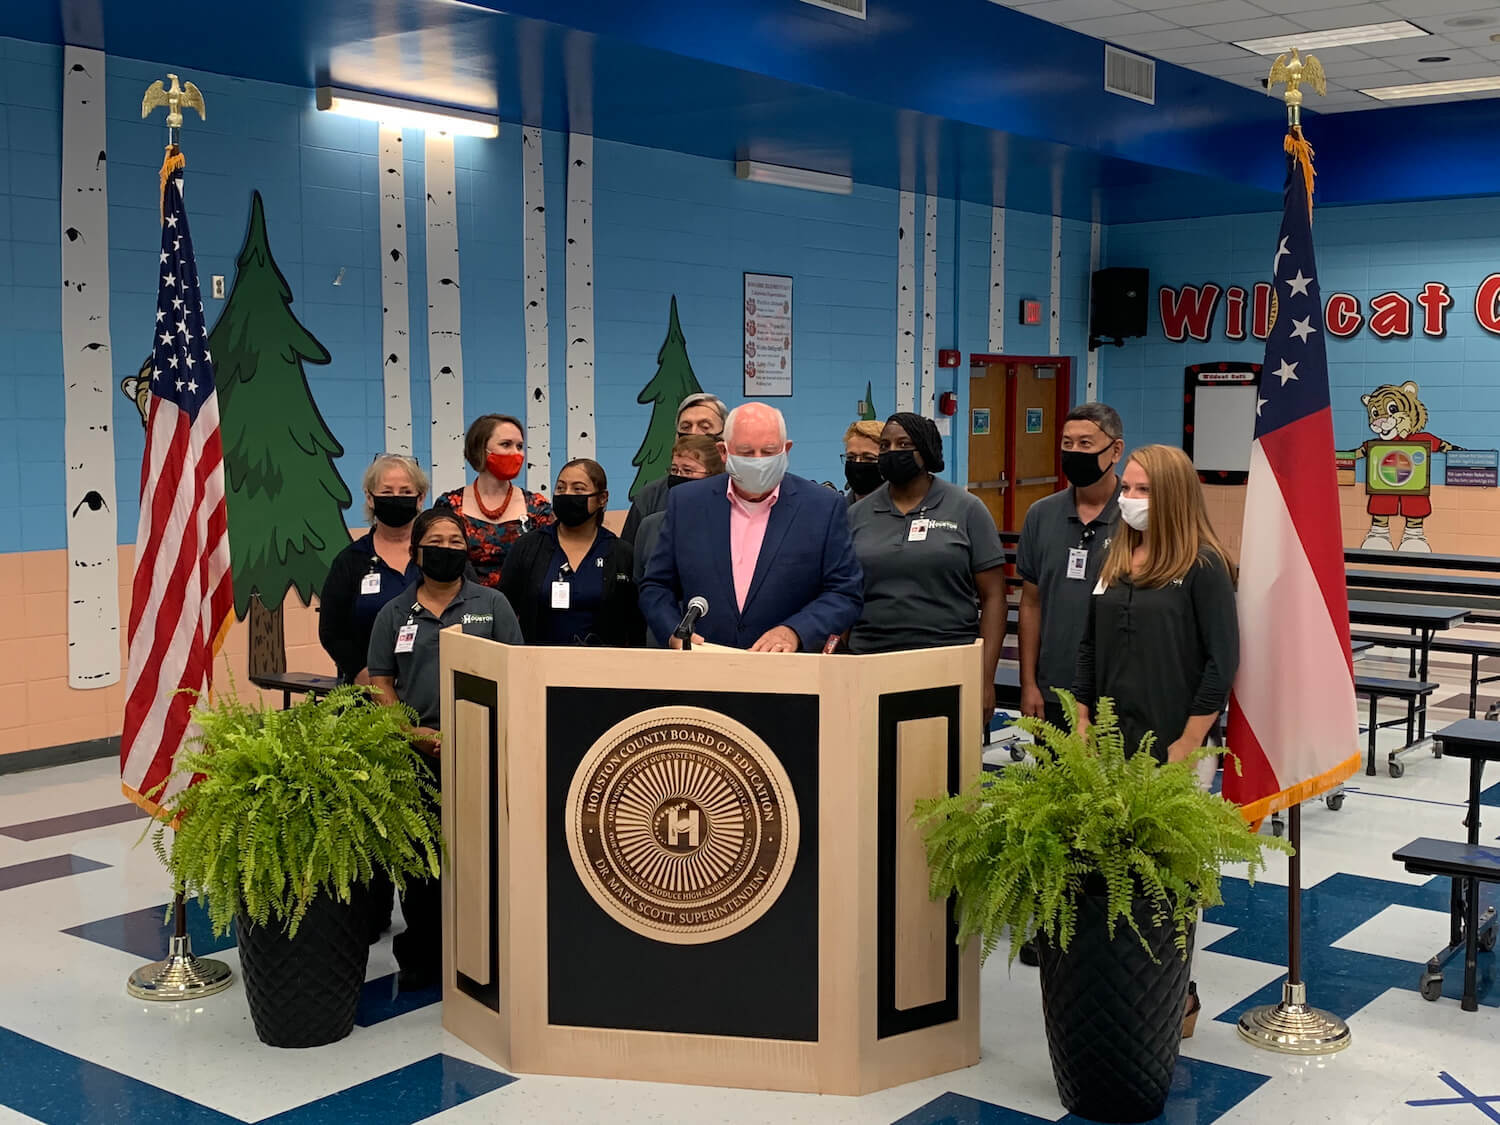 U.S. Secretary of Agriculture Sonny Perdue announced the U.S. Department of Agriculture (USDA) will extend free meals for kids through December 31, 2020. At the Bonaire Elementary School in Bonaire, GA on August 31, 2020.